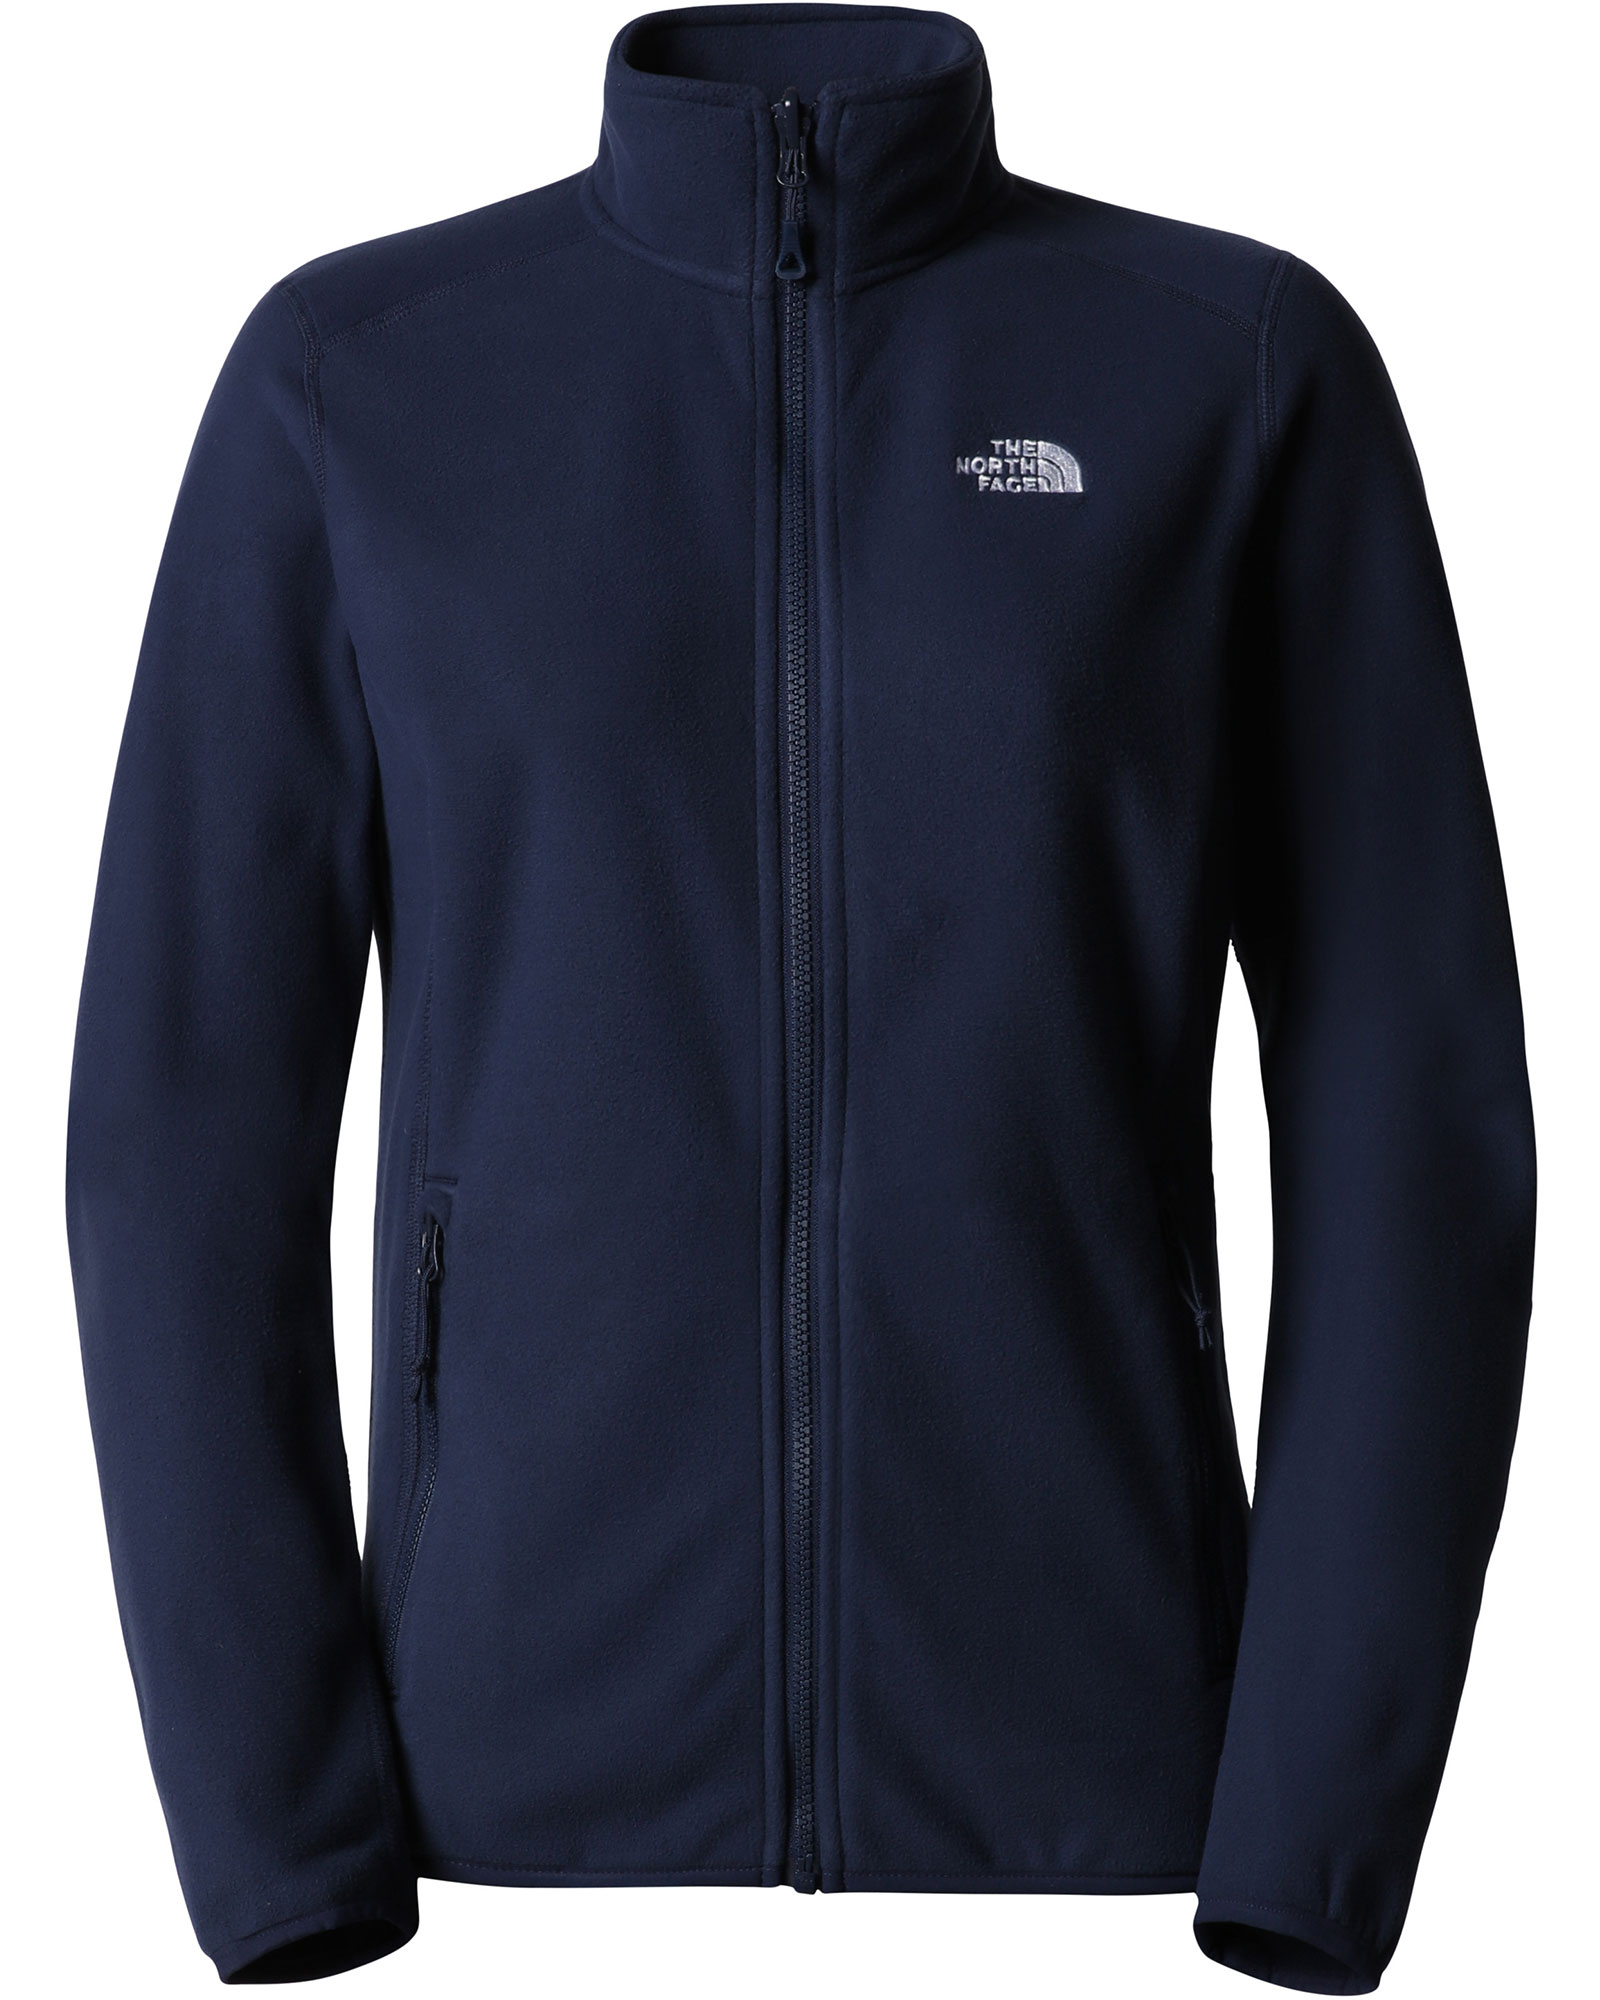 Product image of The North Face 100 Glacier Women's Full Zip